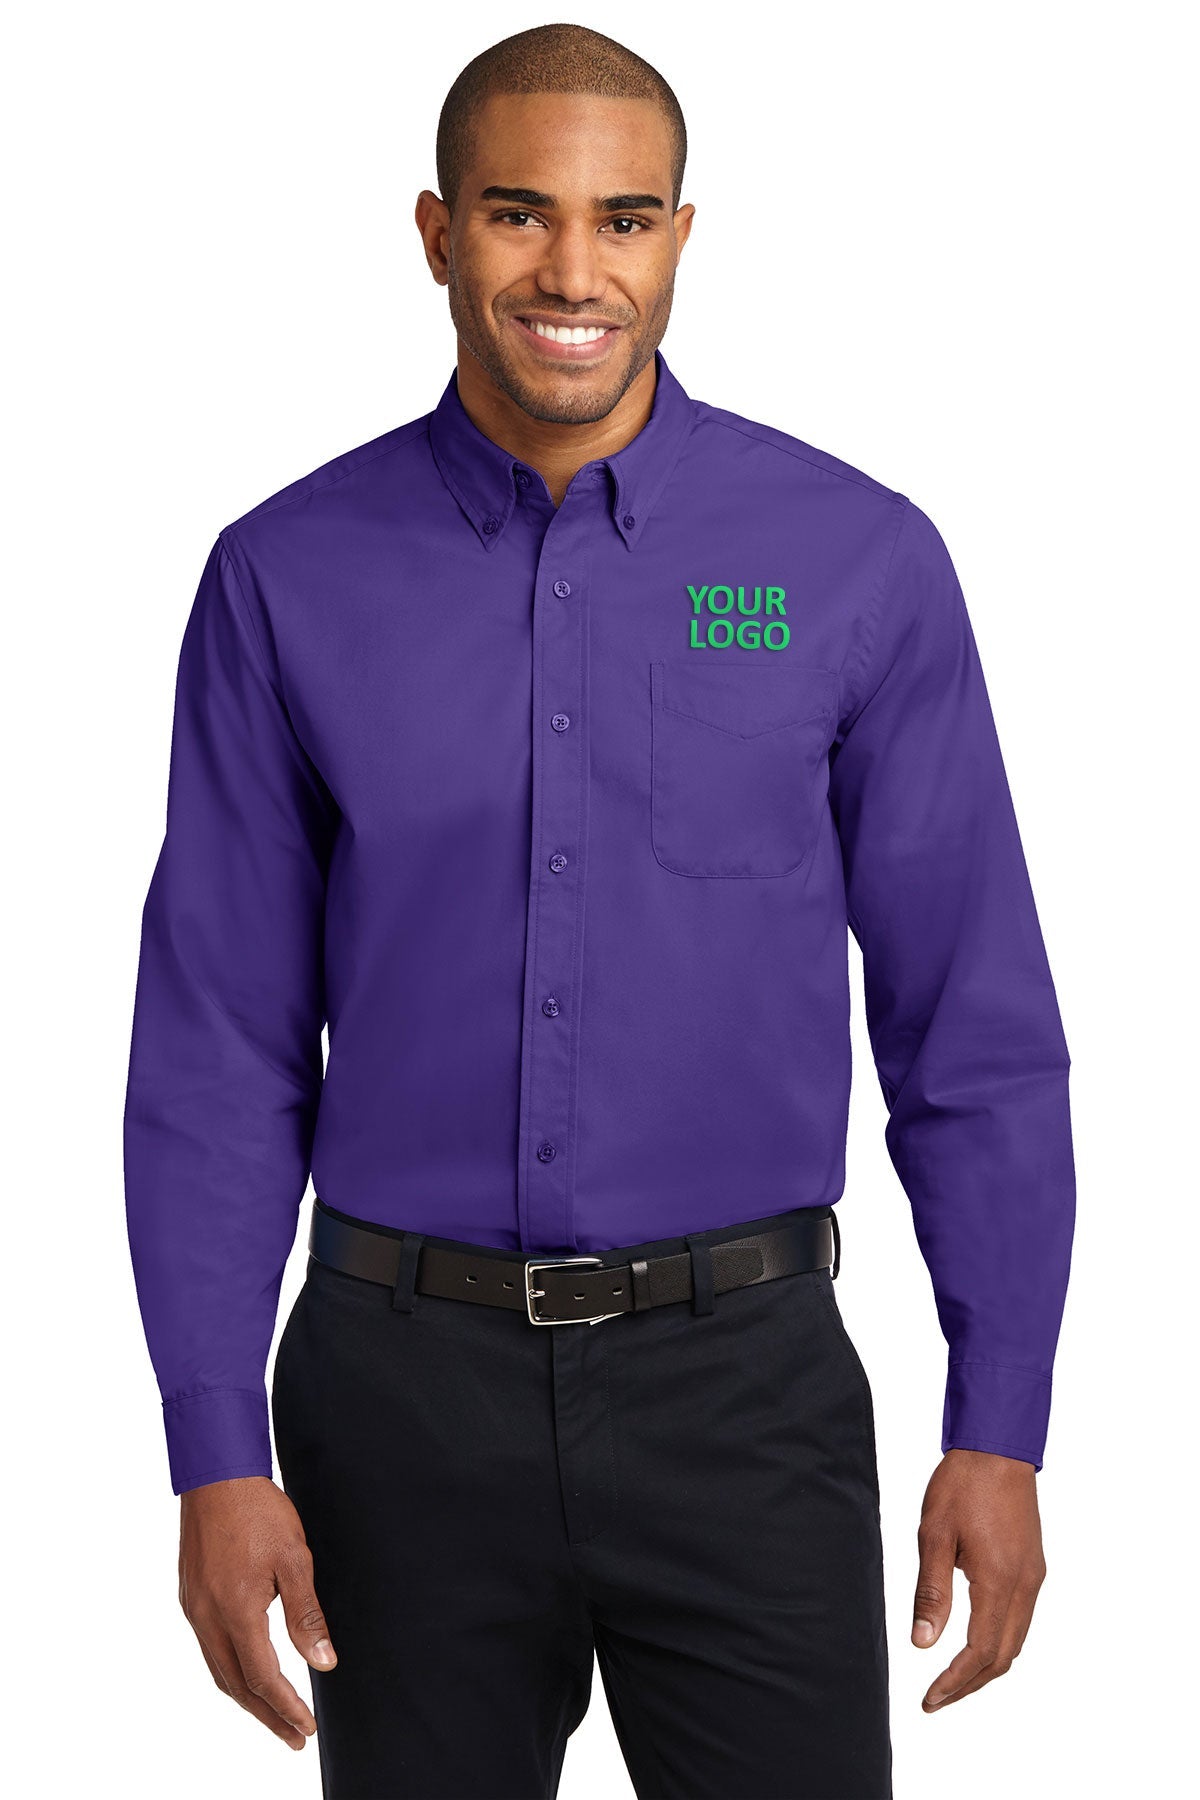 Port Authority Purple/Light Stone S608ES business shirts with company logo